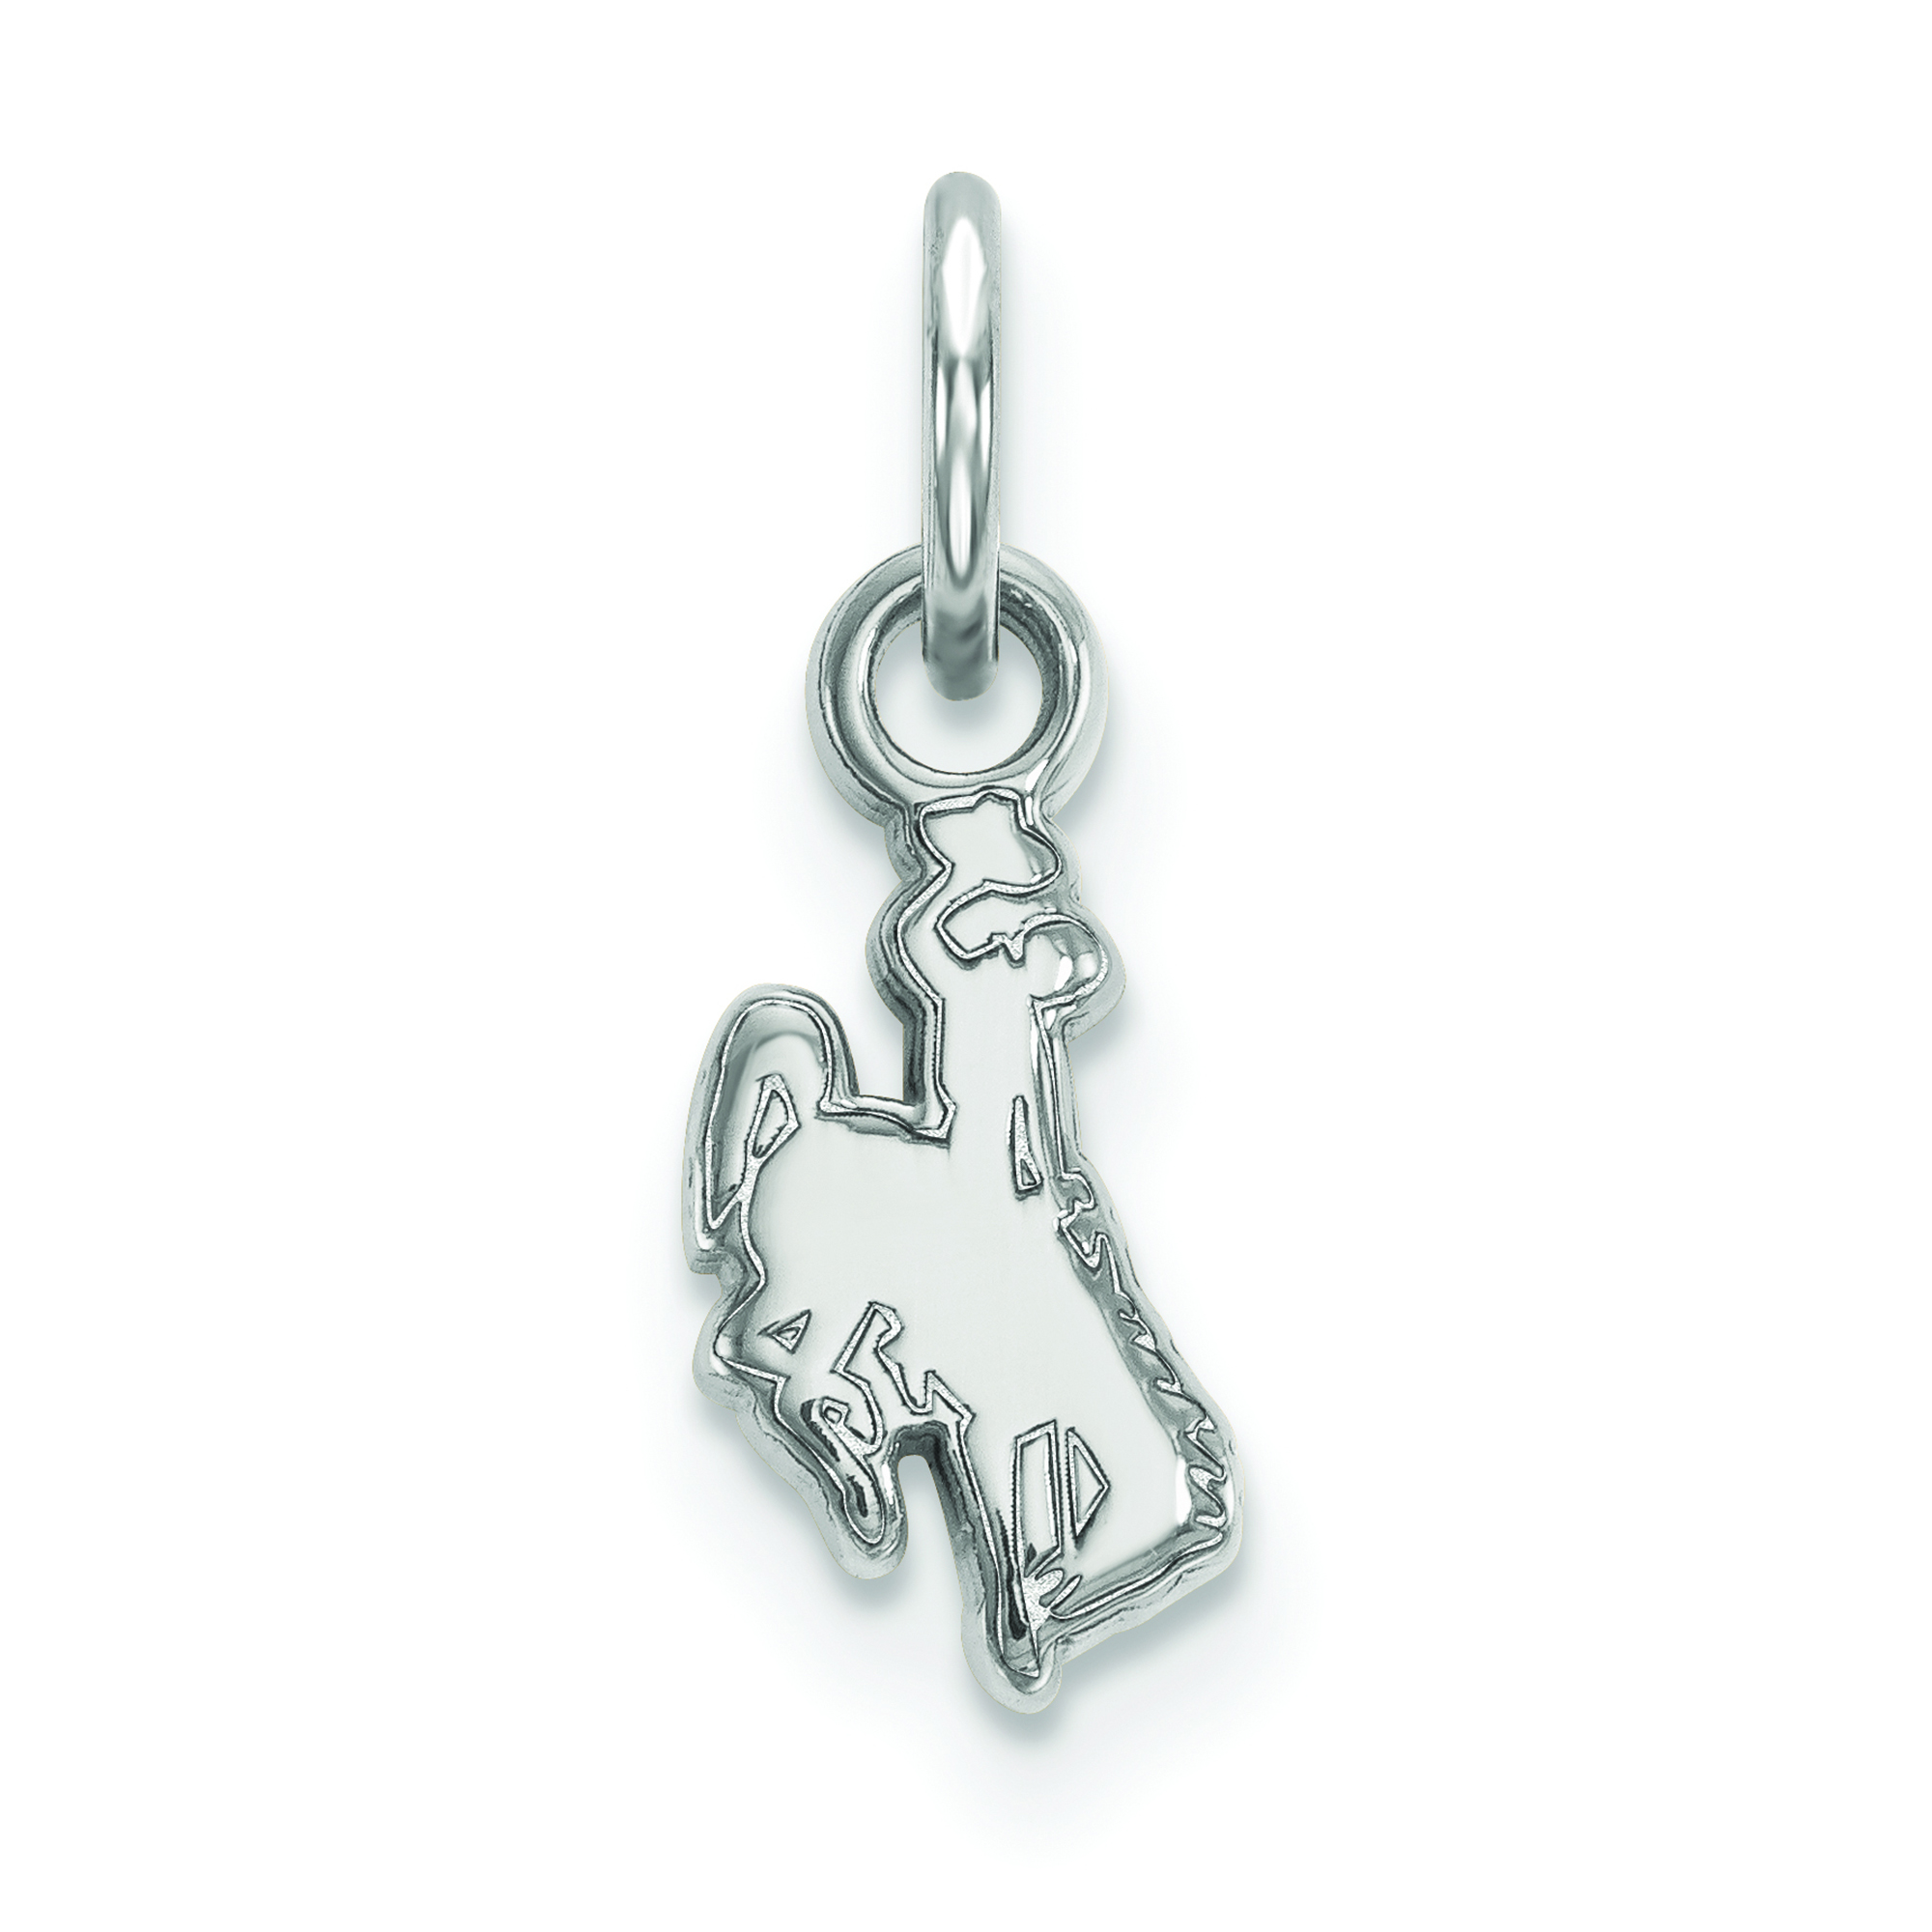 SS003UWY Sterling Silver The University of Wyoming Medium Pendant by LogoArt